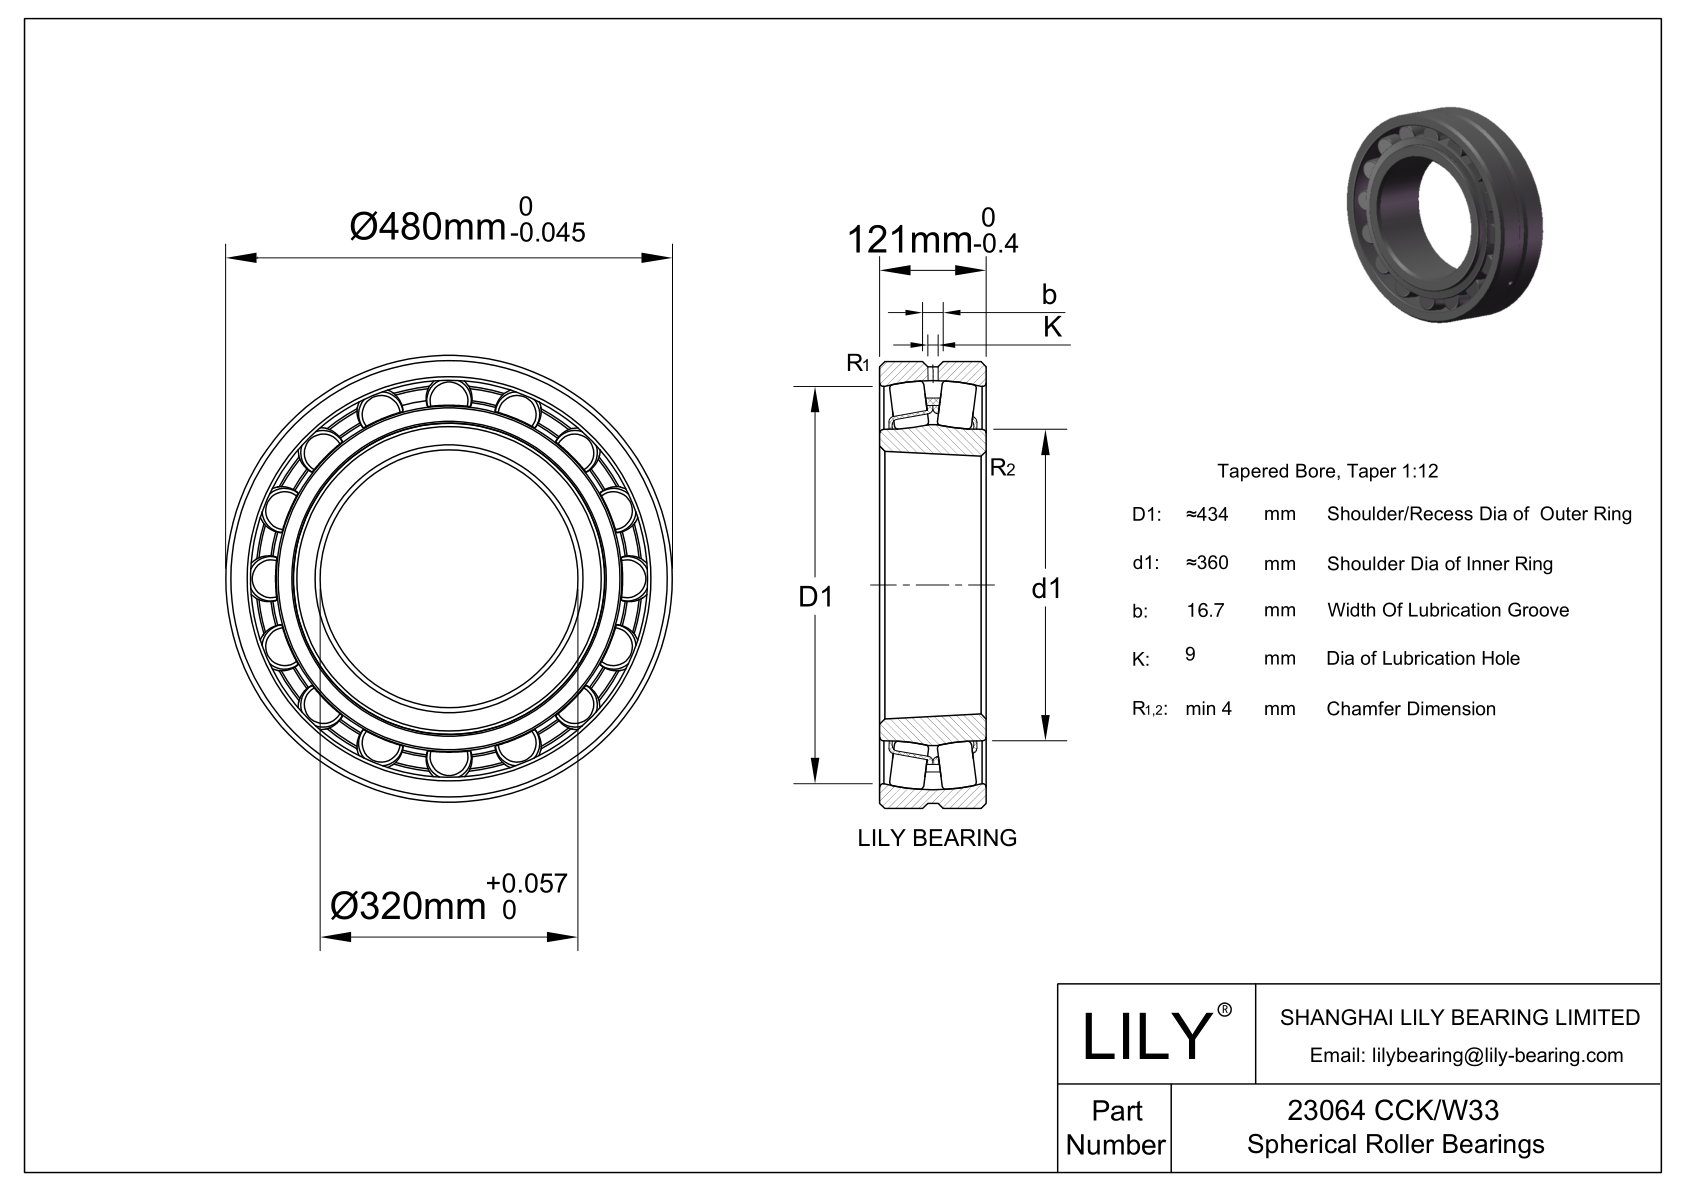 23064 CCK/W33 Double Row Spherical Roller Bearing cad drawing